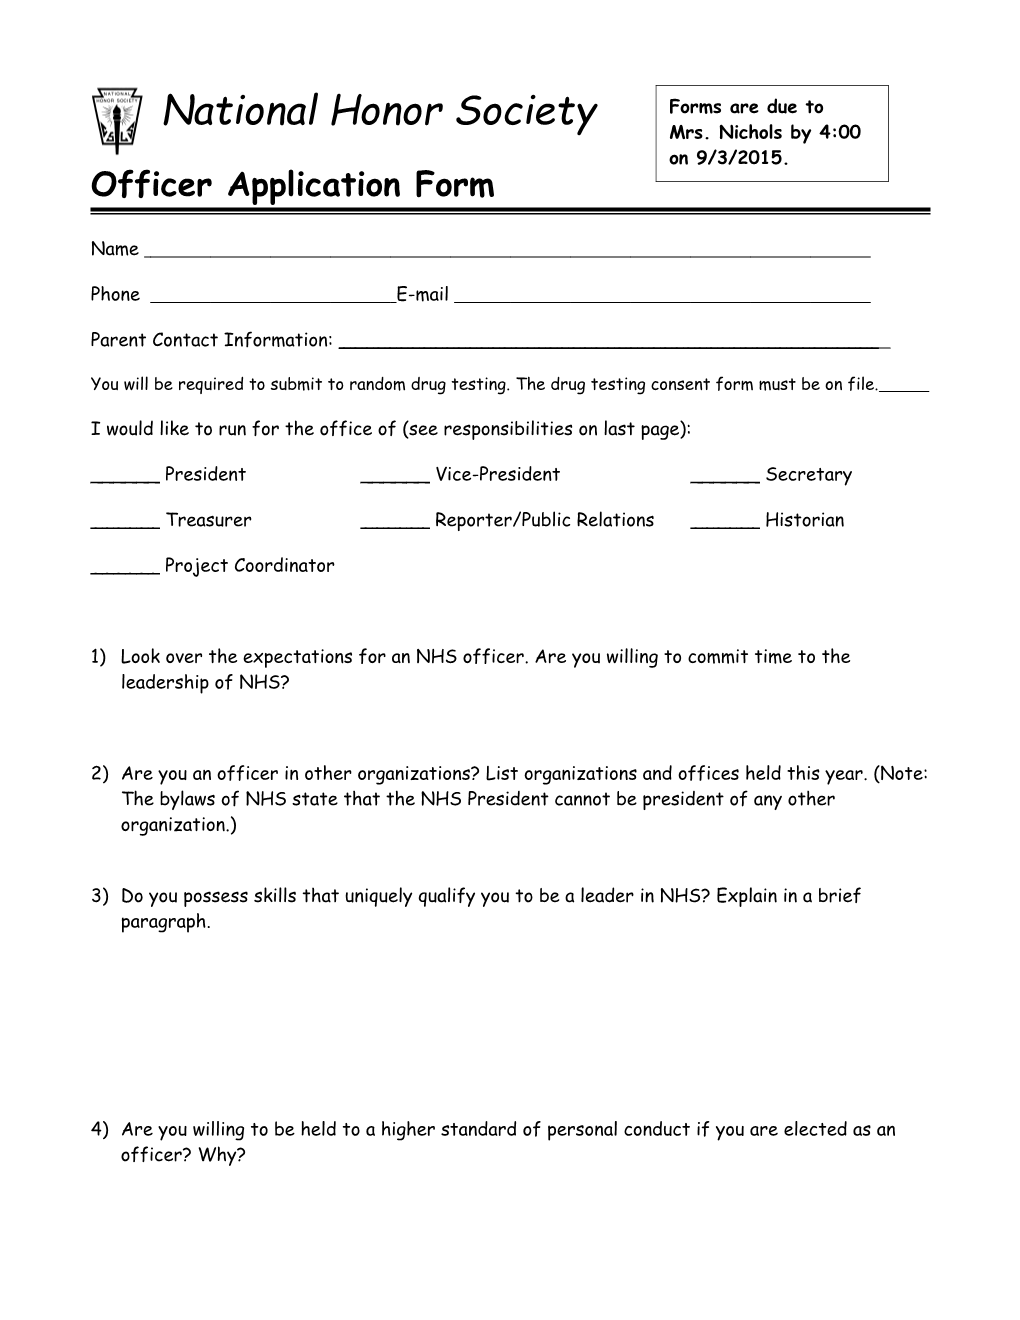 Forms Due to Mrs